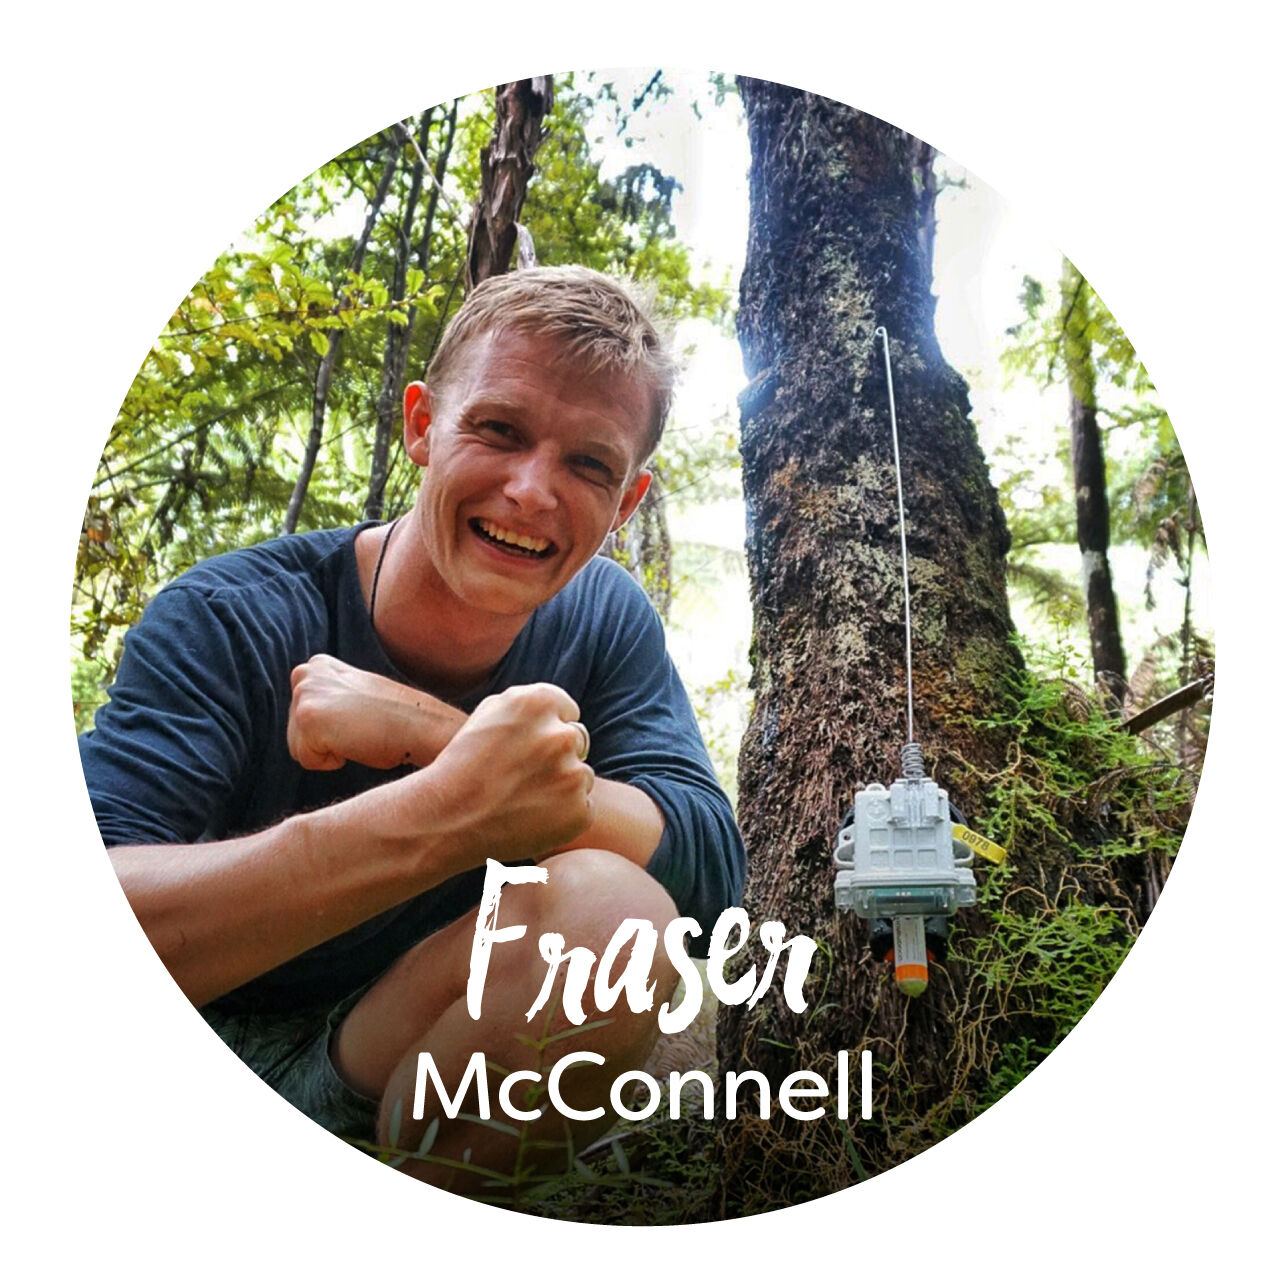 A picture of Fraser McConnell